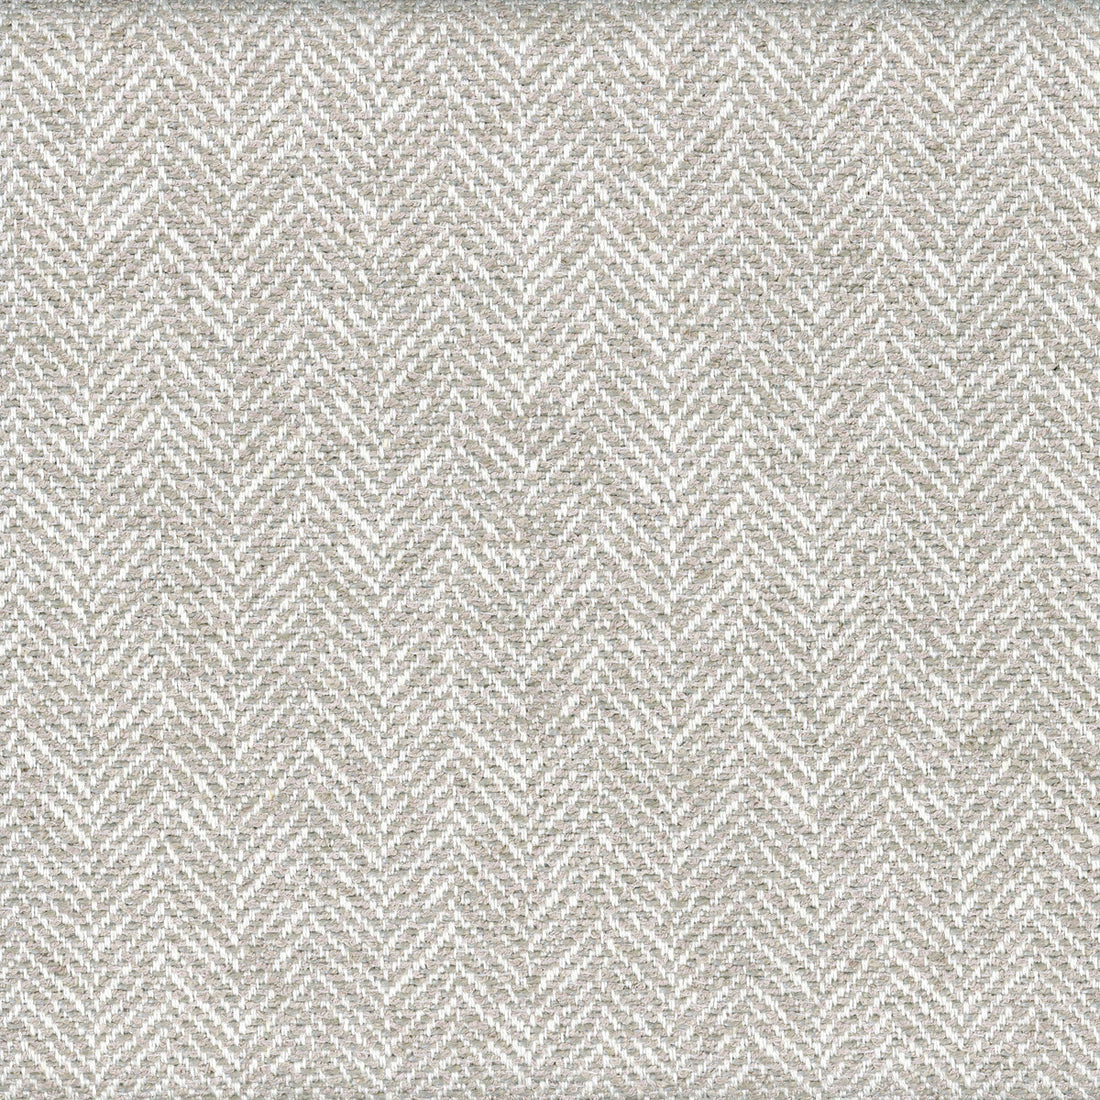 Lecce fabric in string color - pattern AM100327.11.0 - by Kravet Couture in the Andrew Martin Salento collection